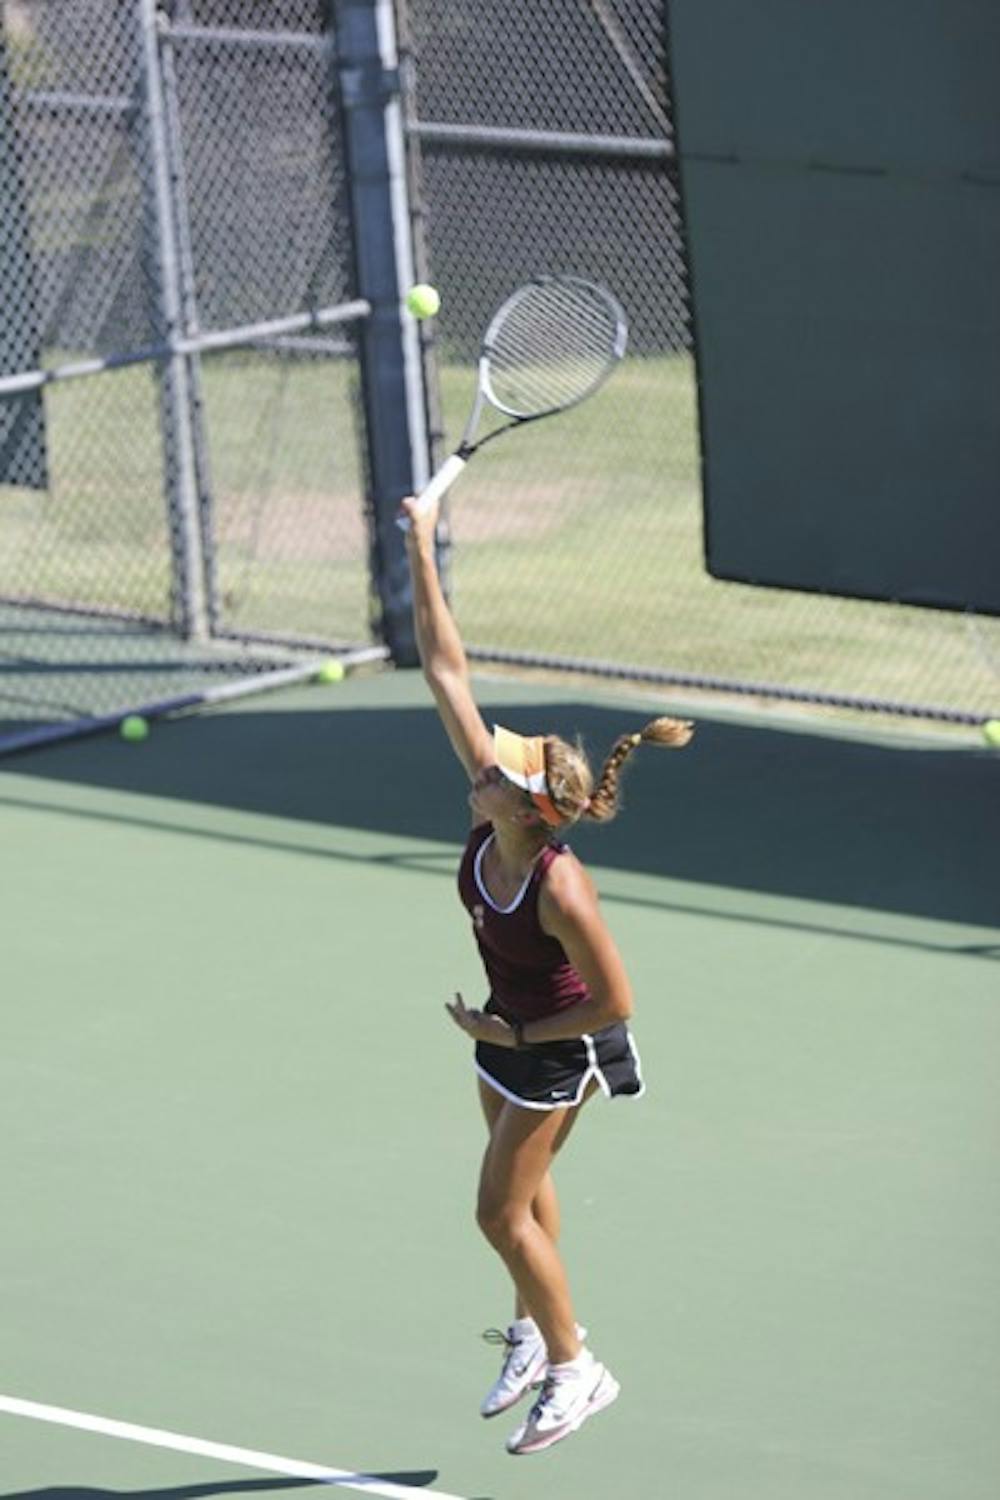 Junior Jacqueline Cako serves the ball in practice last week prior to the Wolverine Invitational. (Photo by Kyle Newman)